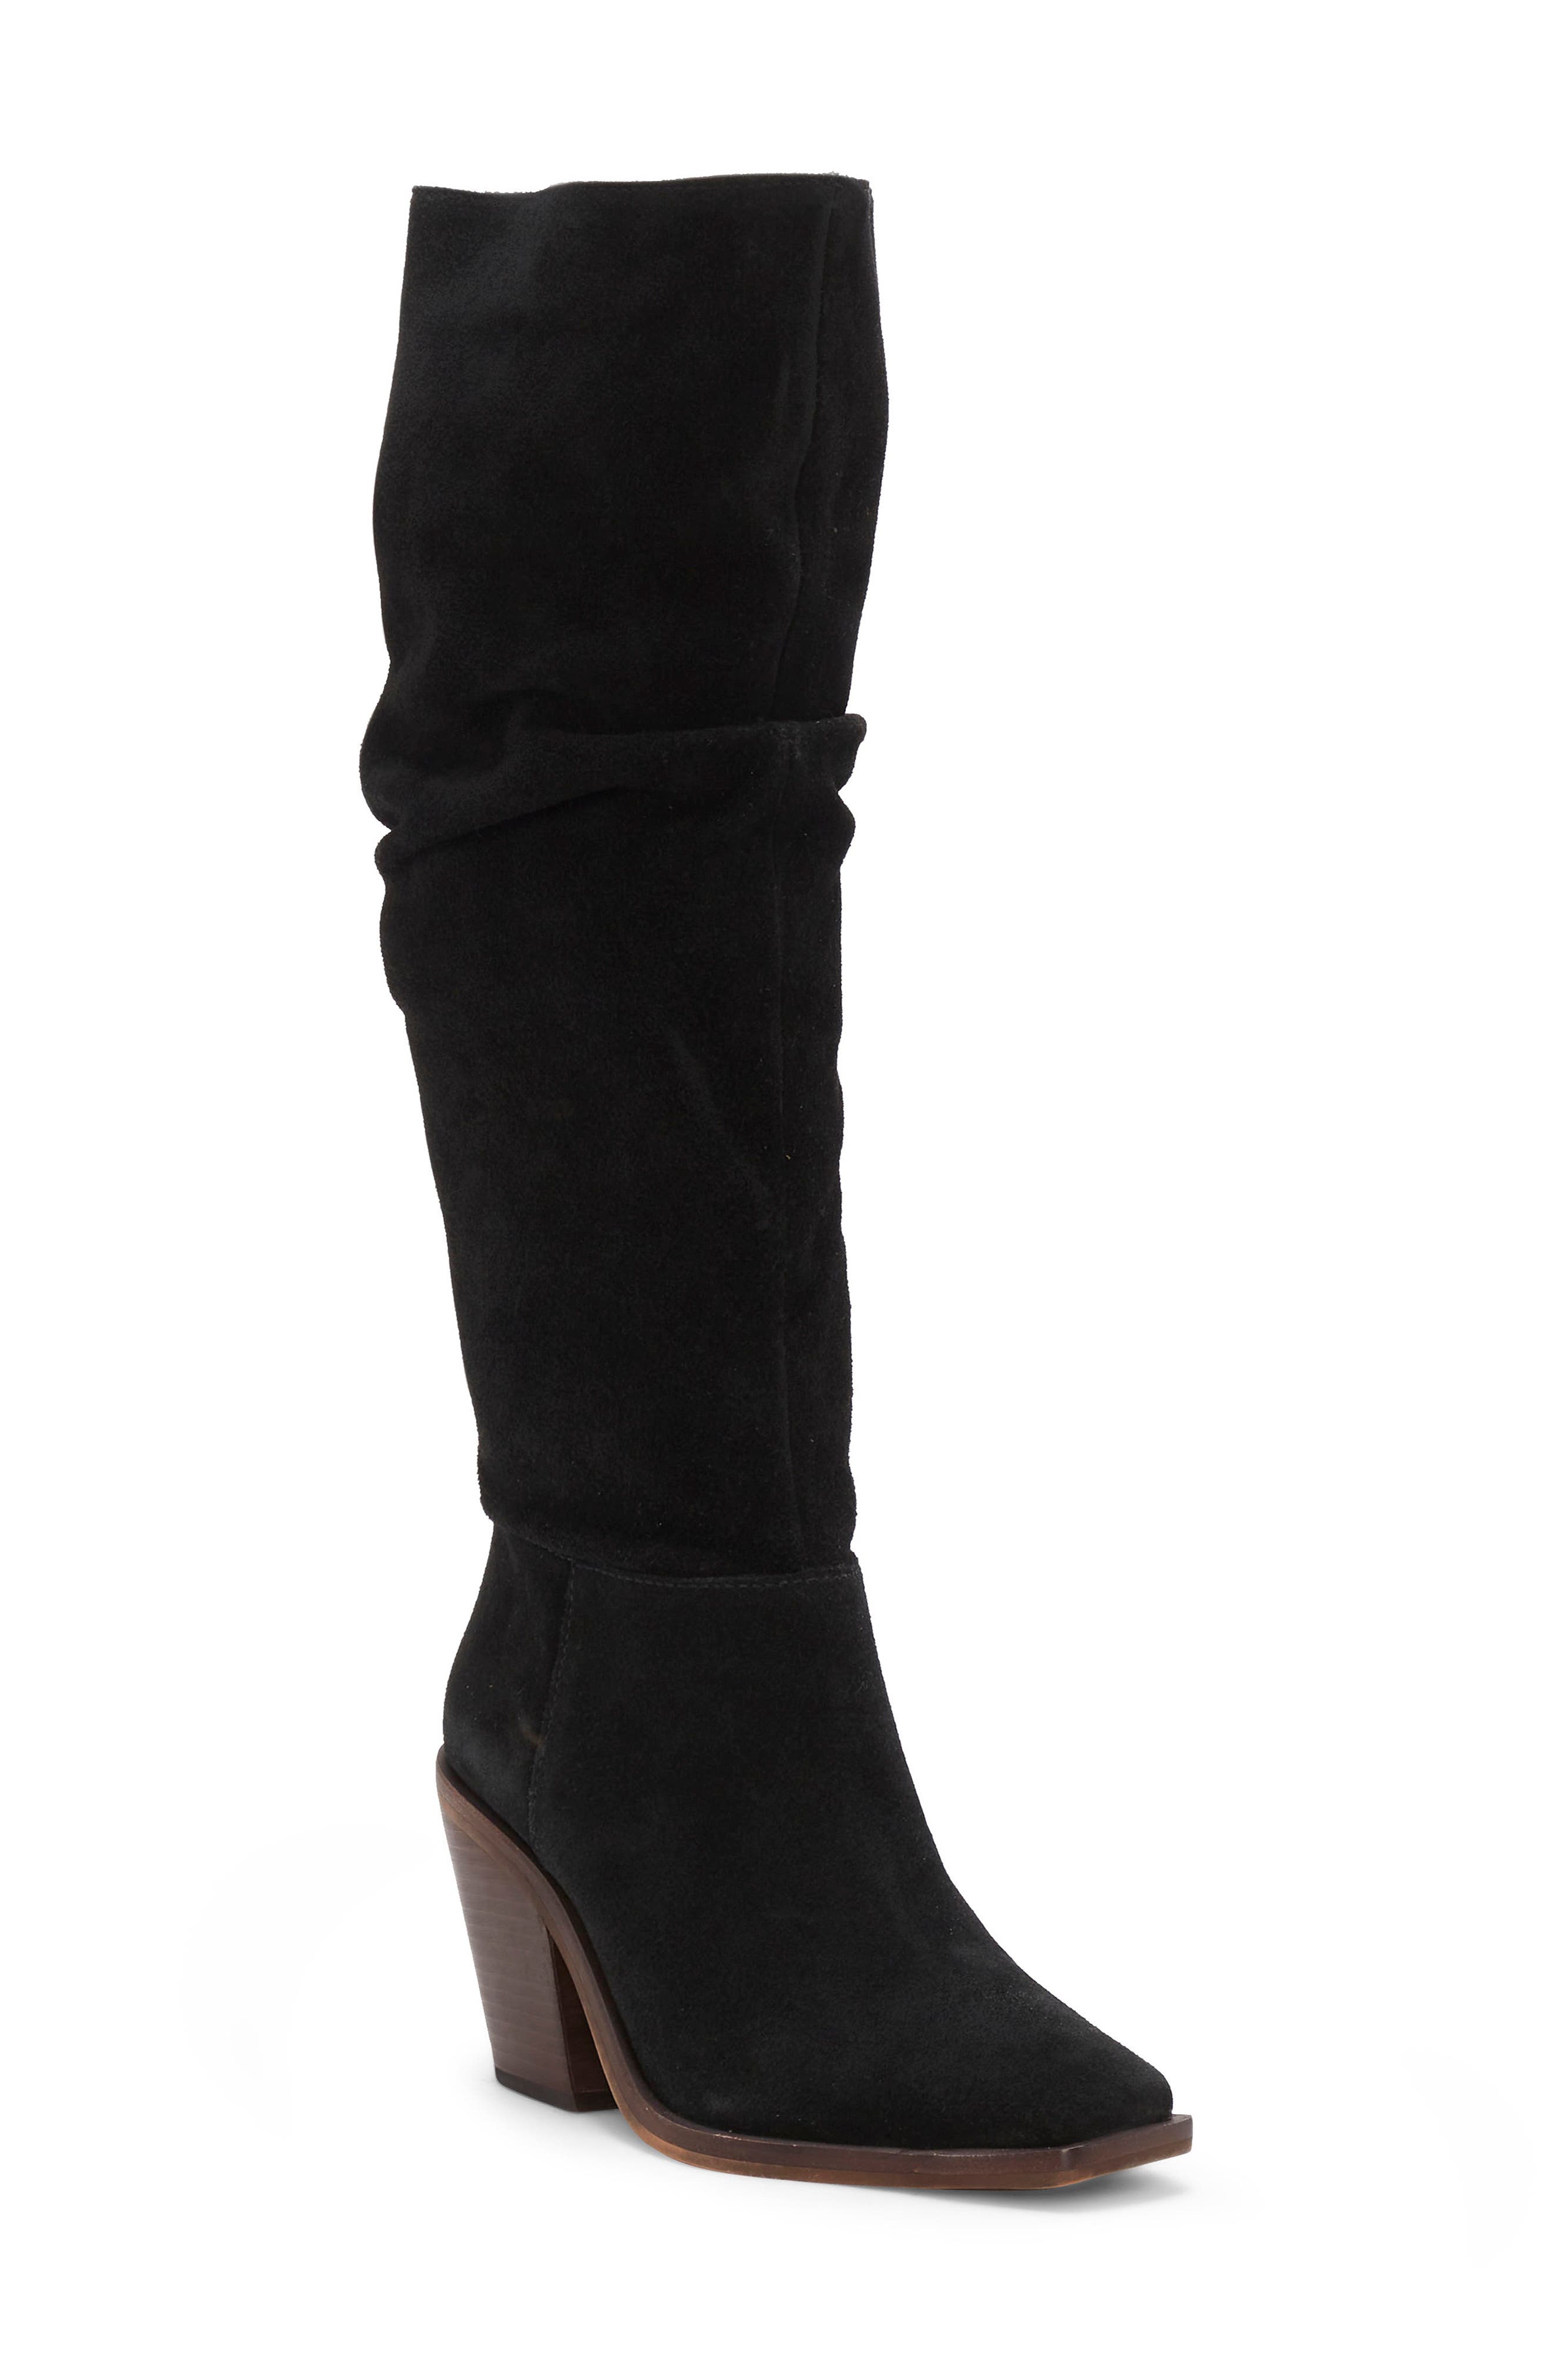 UPC 191707097452 product image for Vince Camuto Alimber Knee High Booy in Black at Nordstrom, Size 5.5 | upcitemdb.com